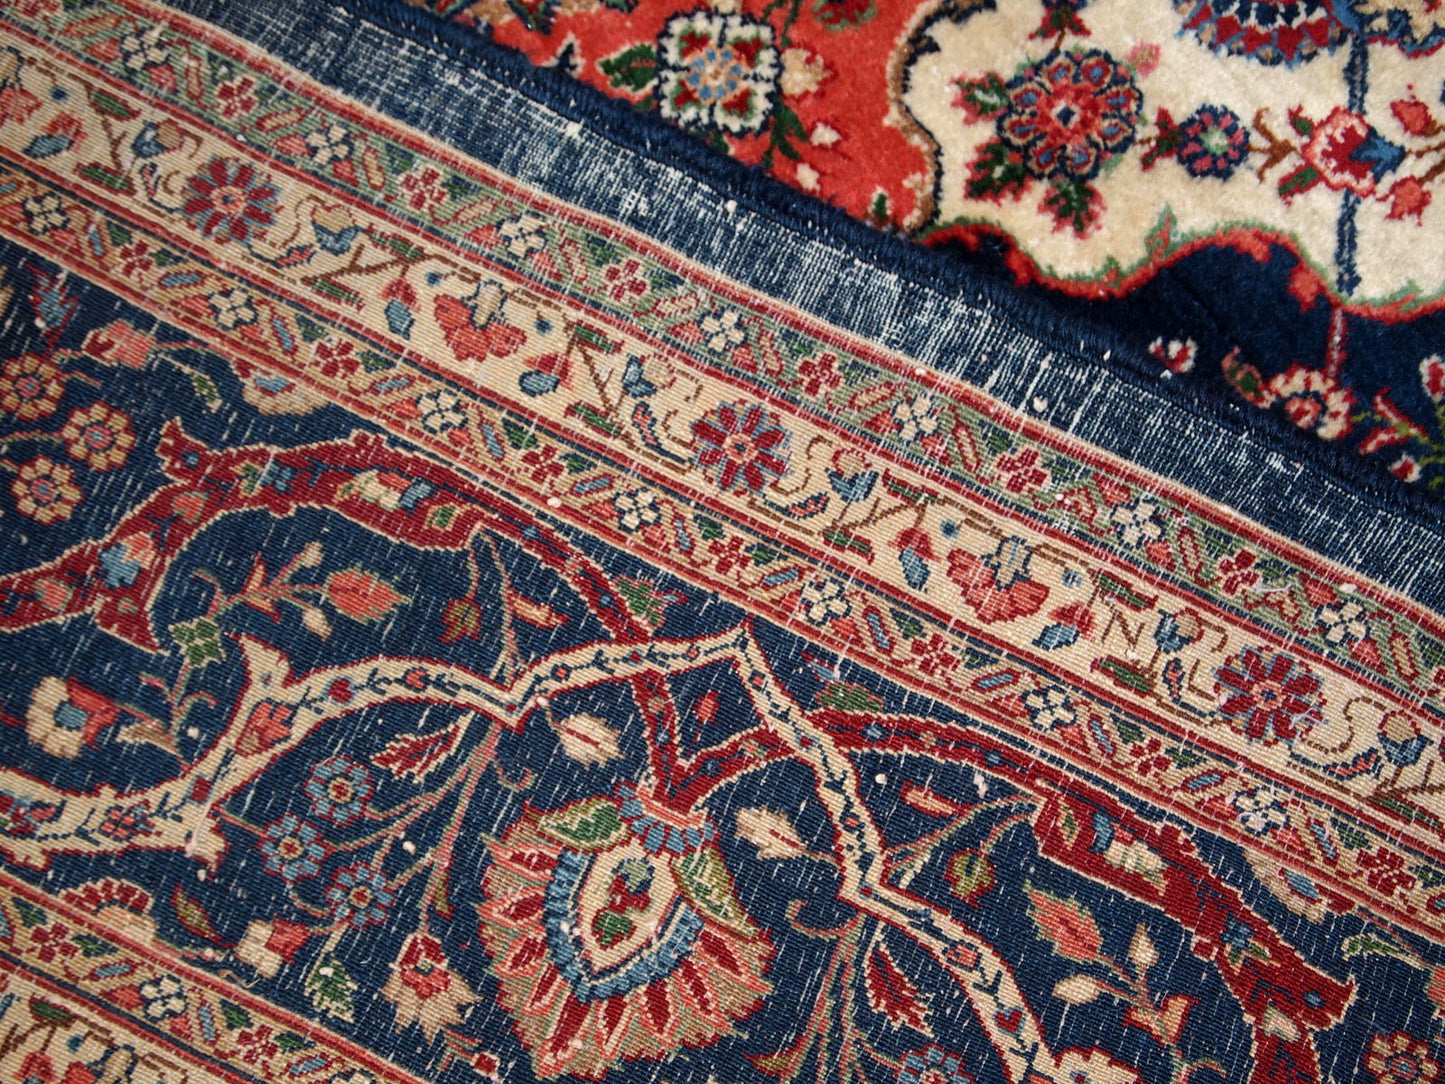 Antique Persian Kashan rug in colourful shades. The rug is in good condition, made in the beginning of 20th century.